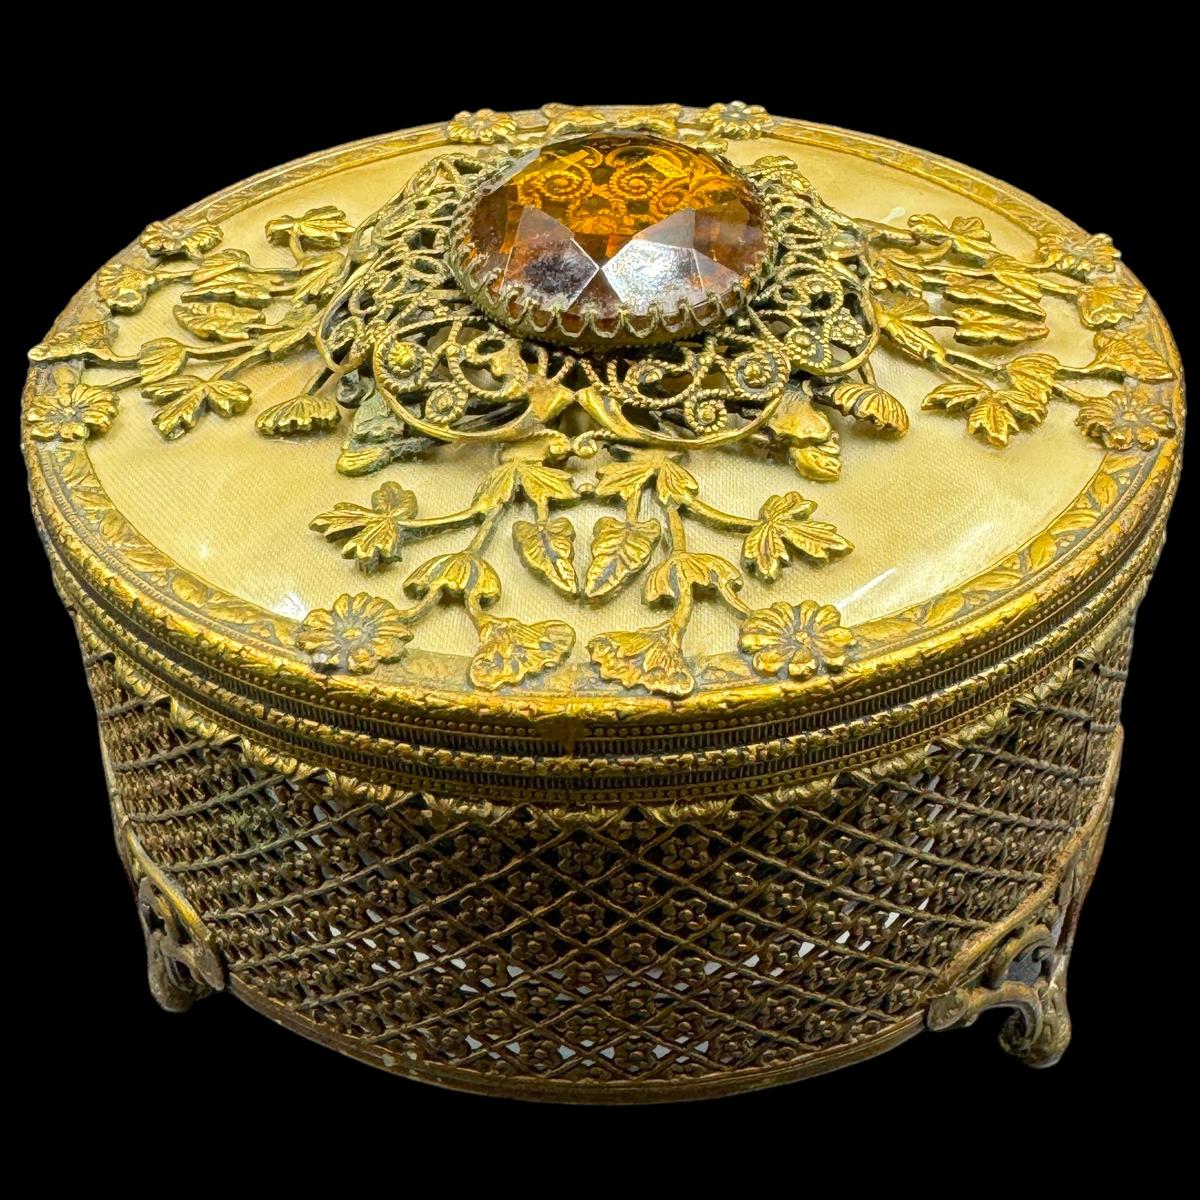 Gorgeous antique gold-plated jewelry box